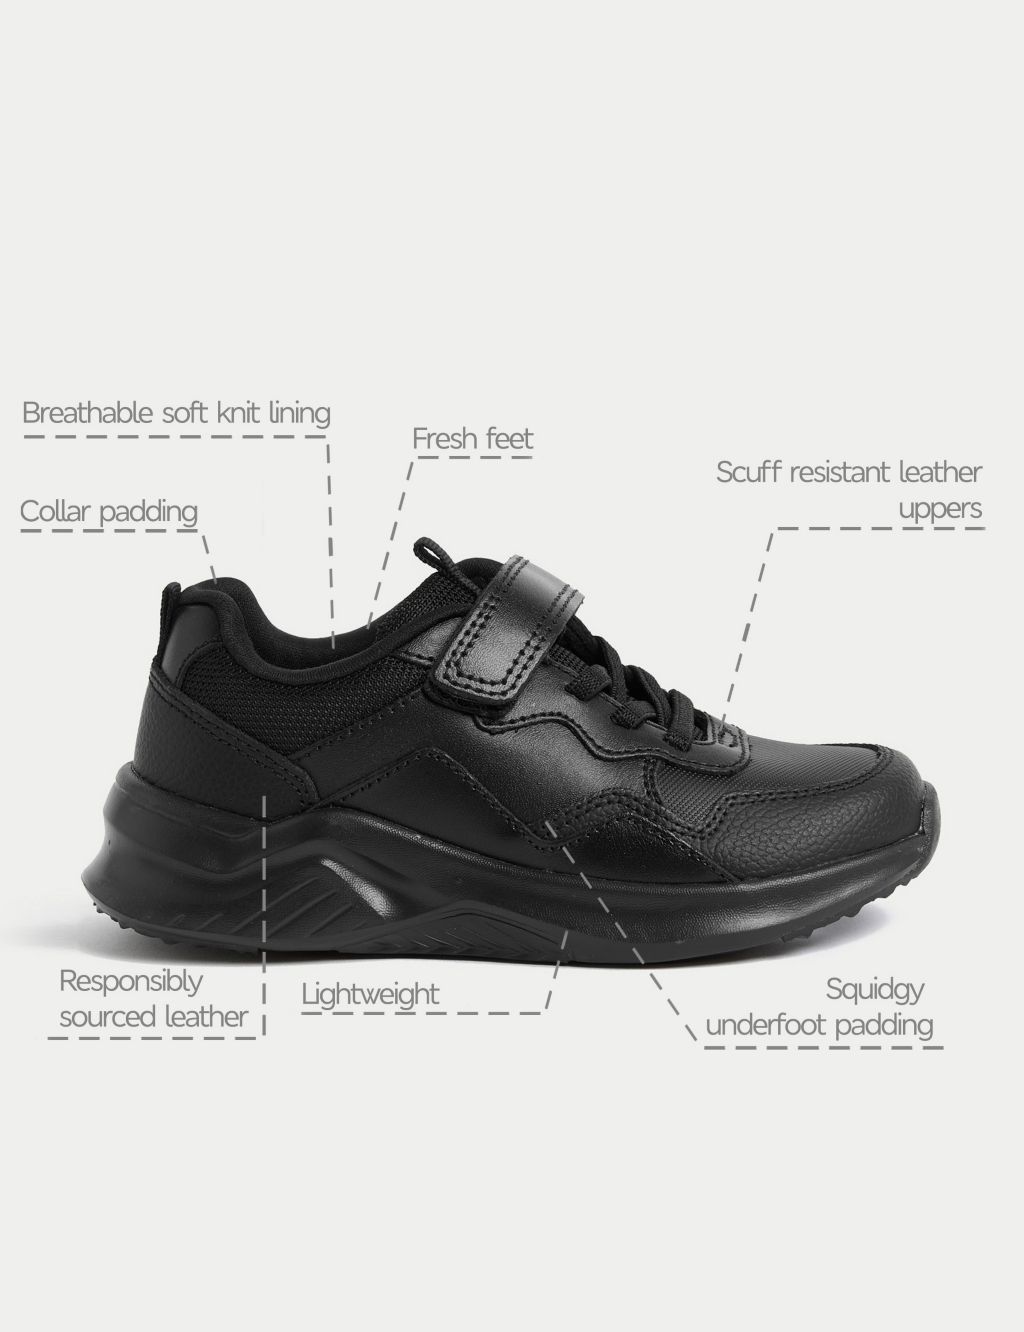 Kids' Leather Freshfeet™ School Shoes (8 Small-2 Large) image 5